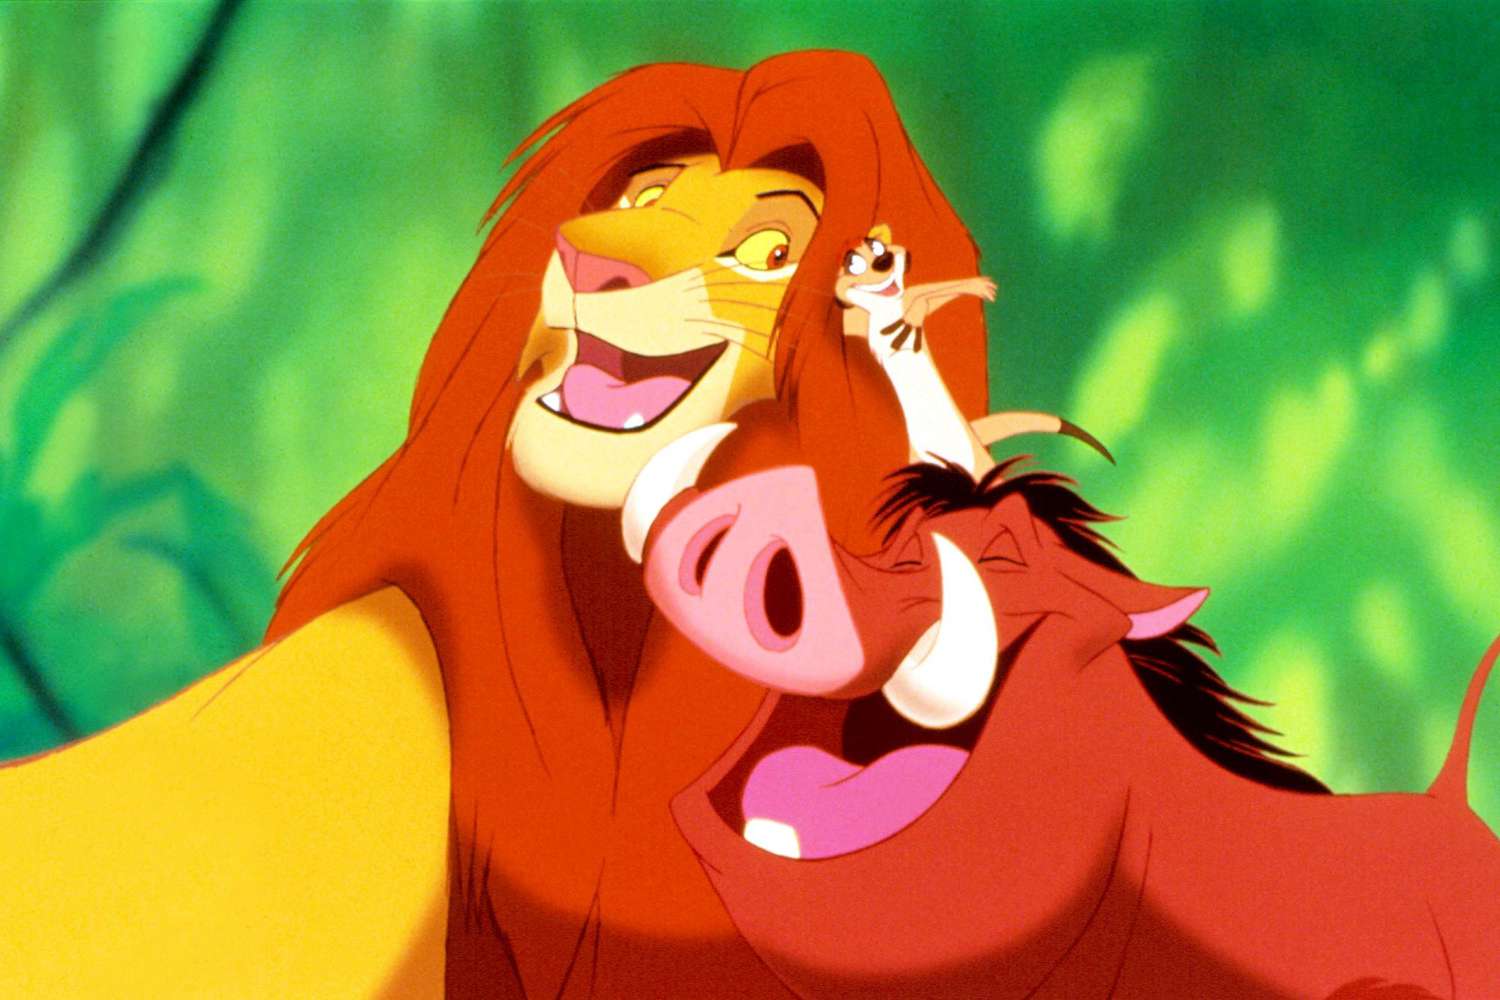 Nathan Lane reveals the origin of Pumbaa's farts in 'The Lion King'